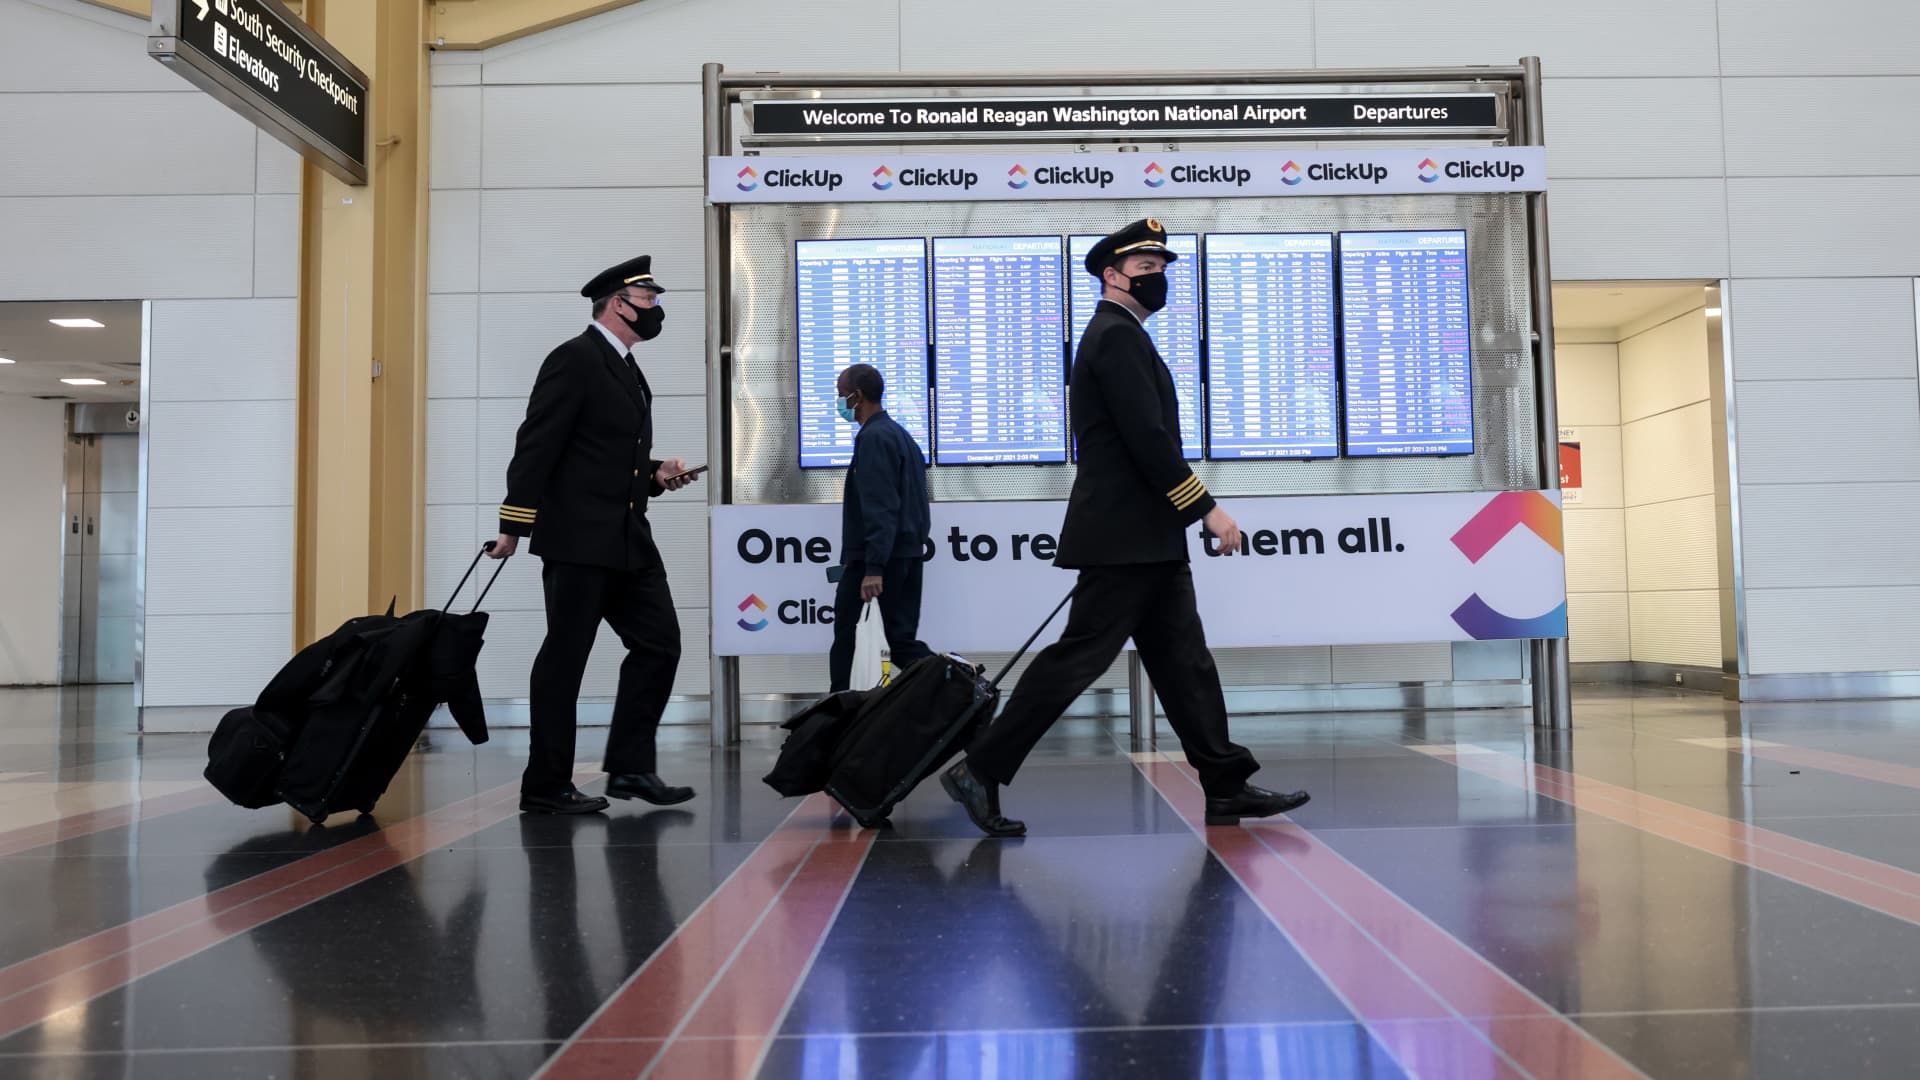 A severe pilot shortage in the U.S. leaves airlines scrambling for solutions